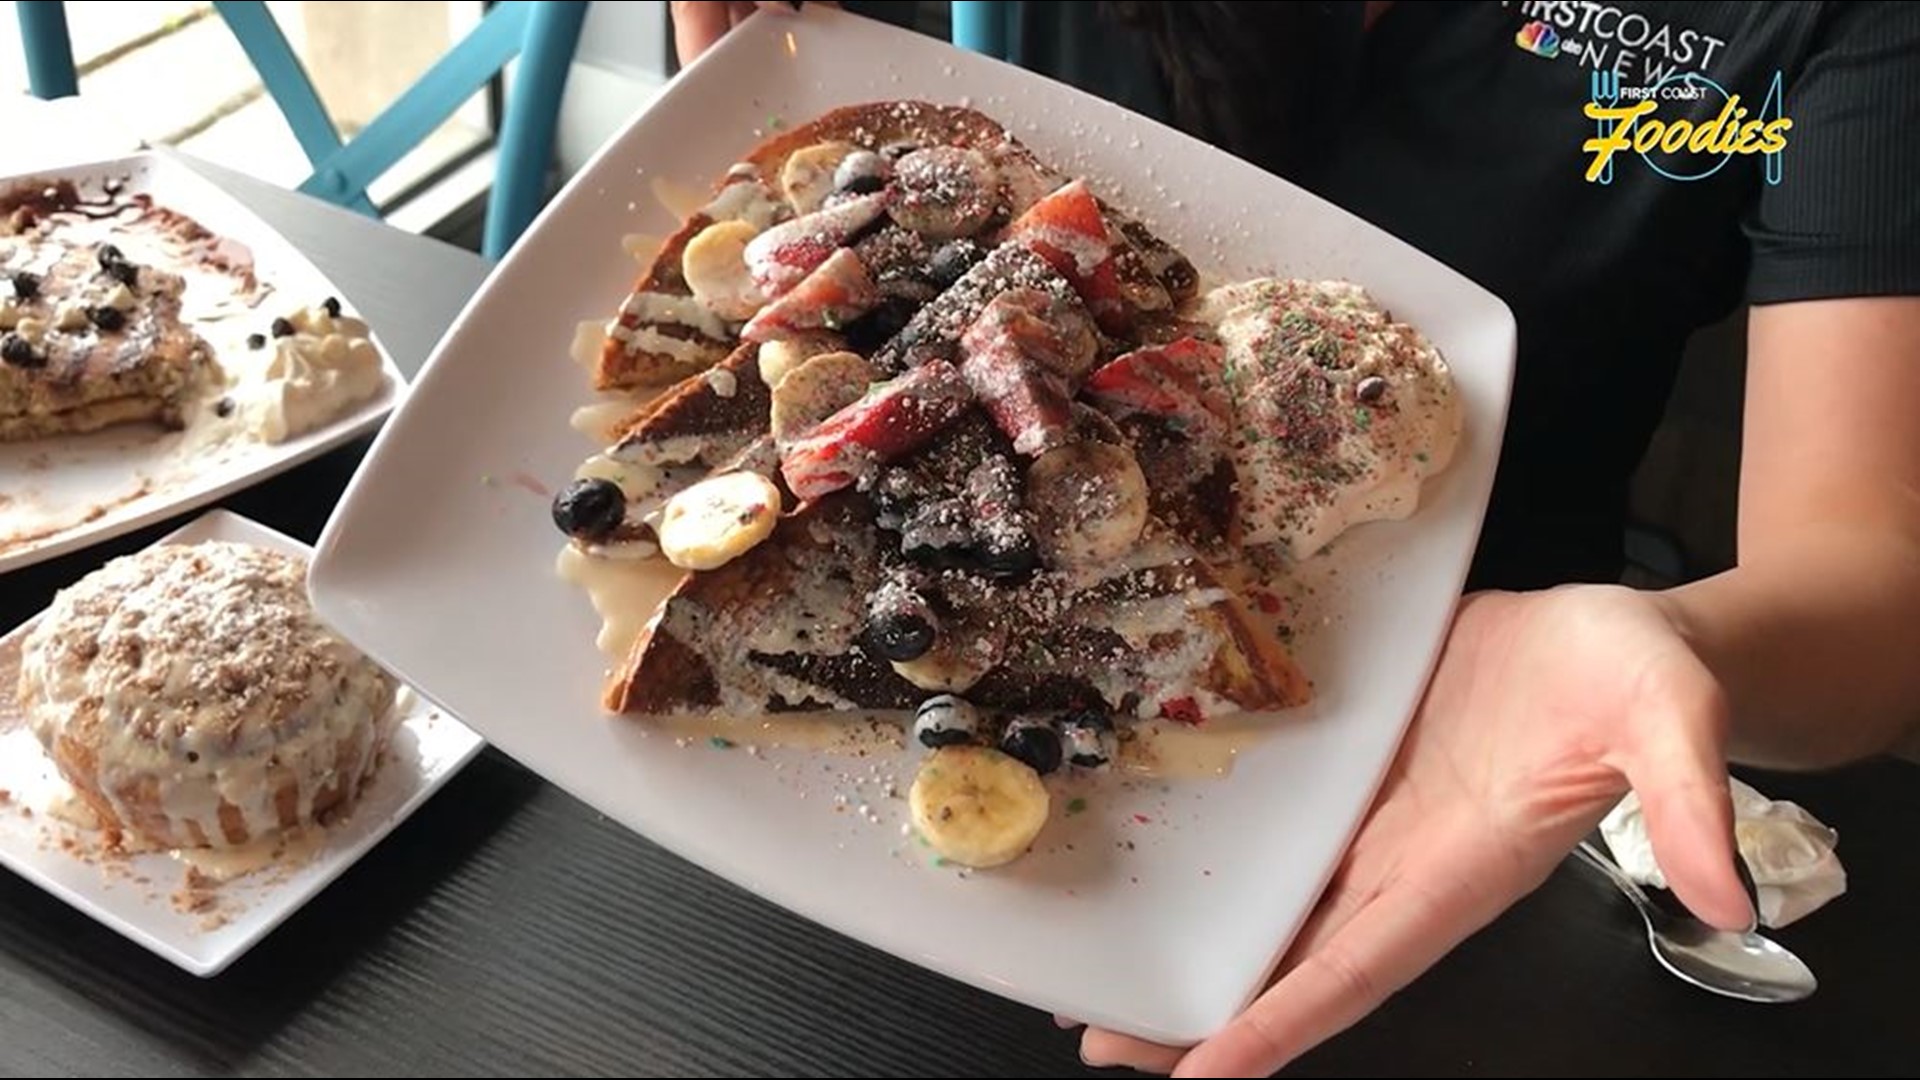 If you haven't been to the new Canopy Road Cafe that opened on Jacksonville's Southside, you need to! Try their famous Cap 'n' Crunch French Toast, or my personal favorite: The Cookies and Cream Pancakes! 😋